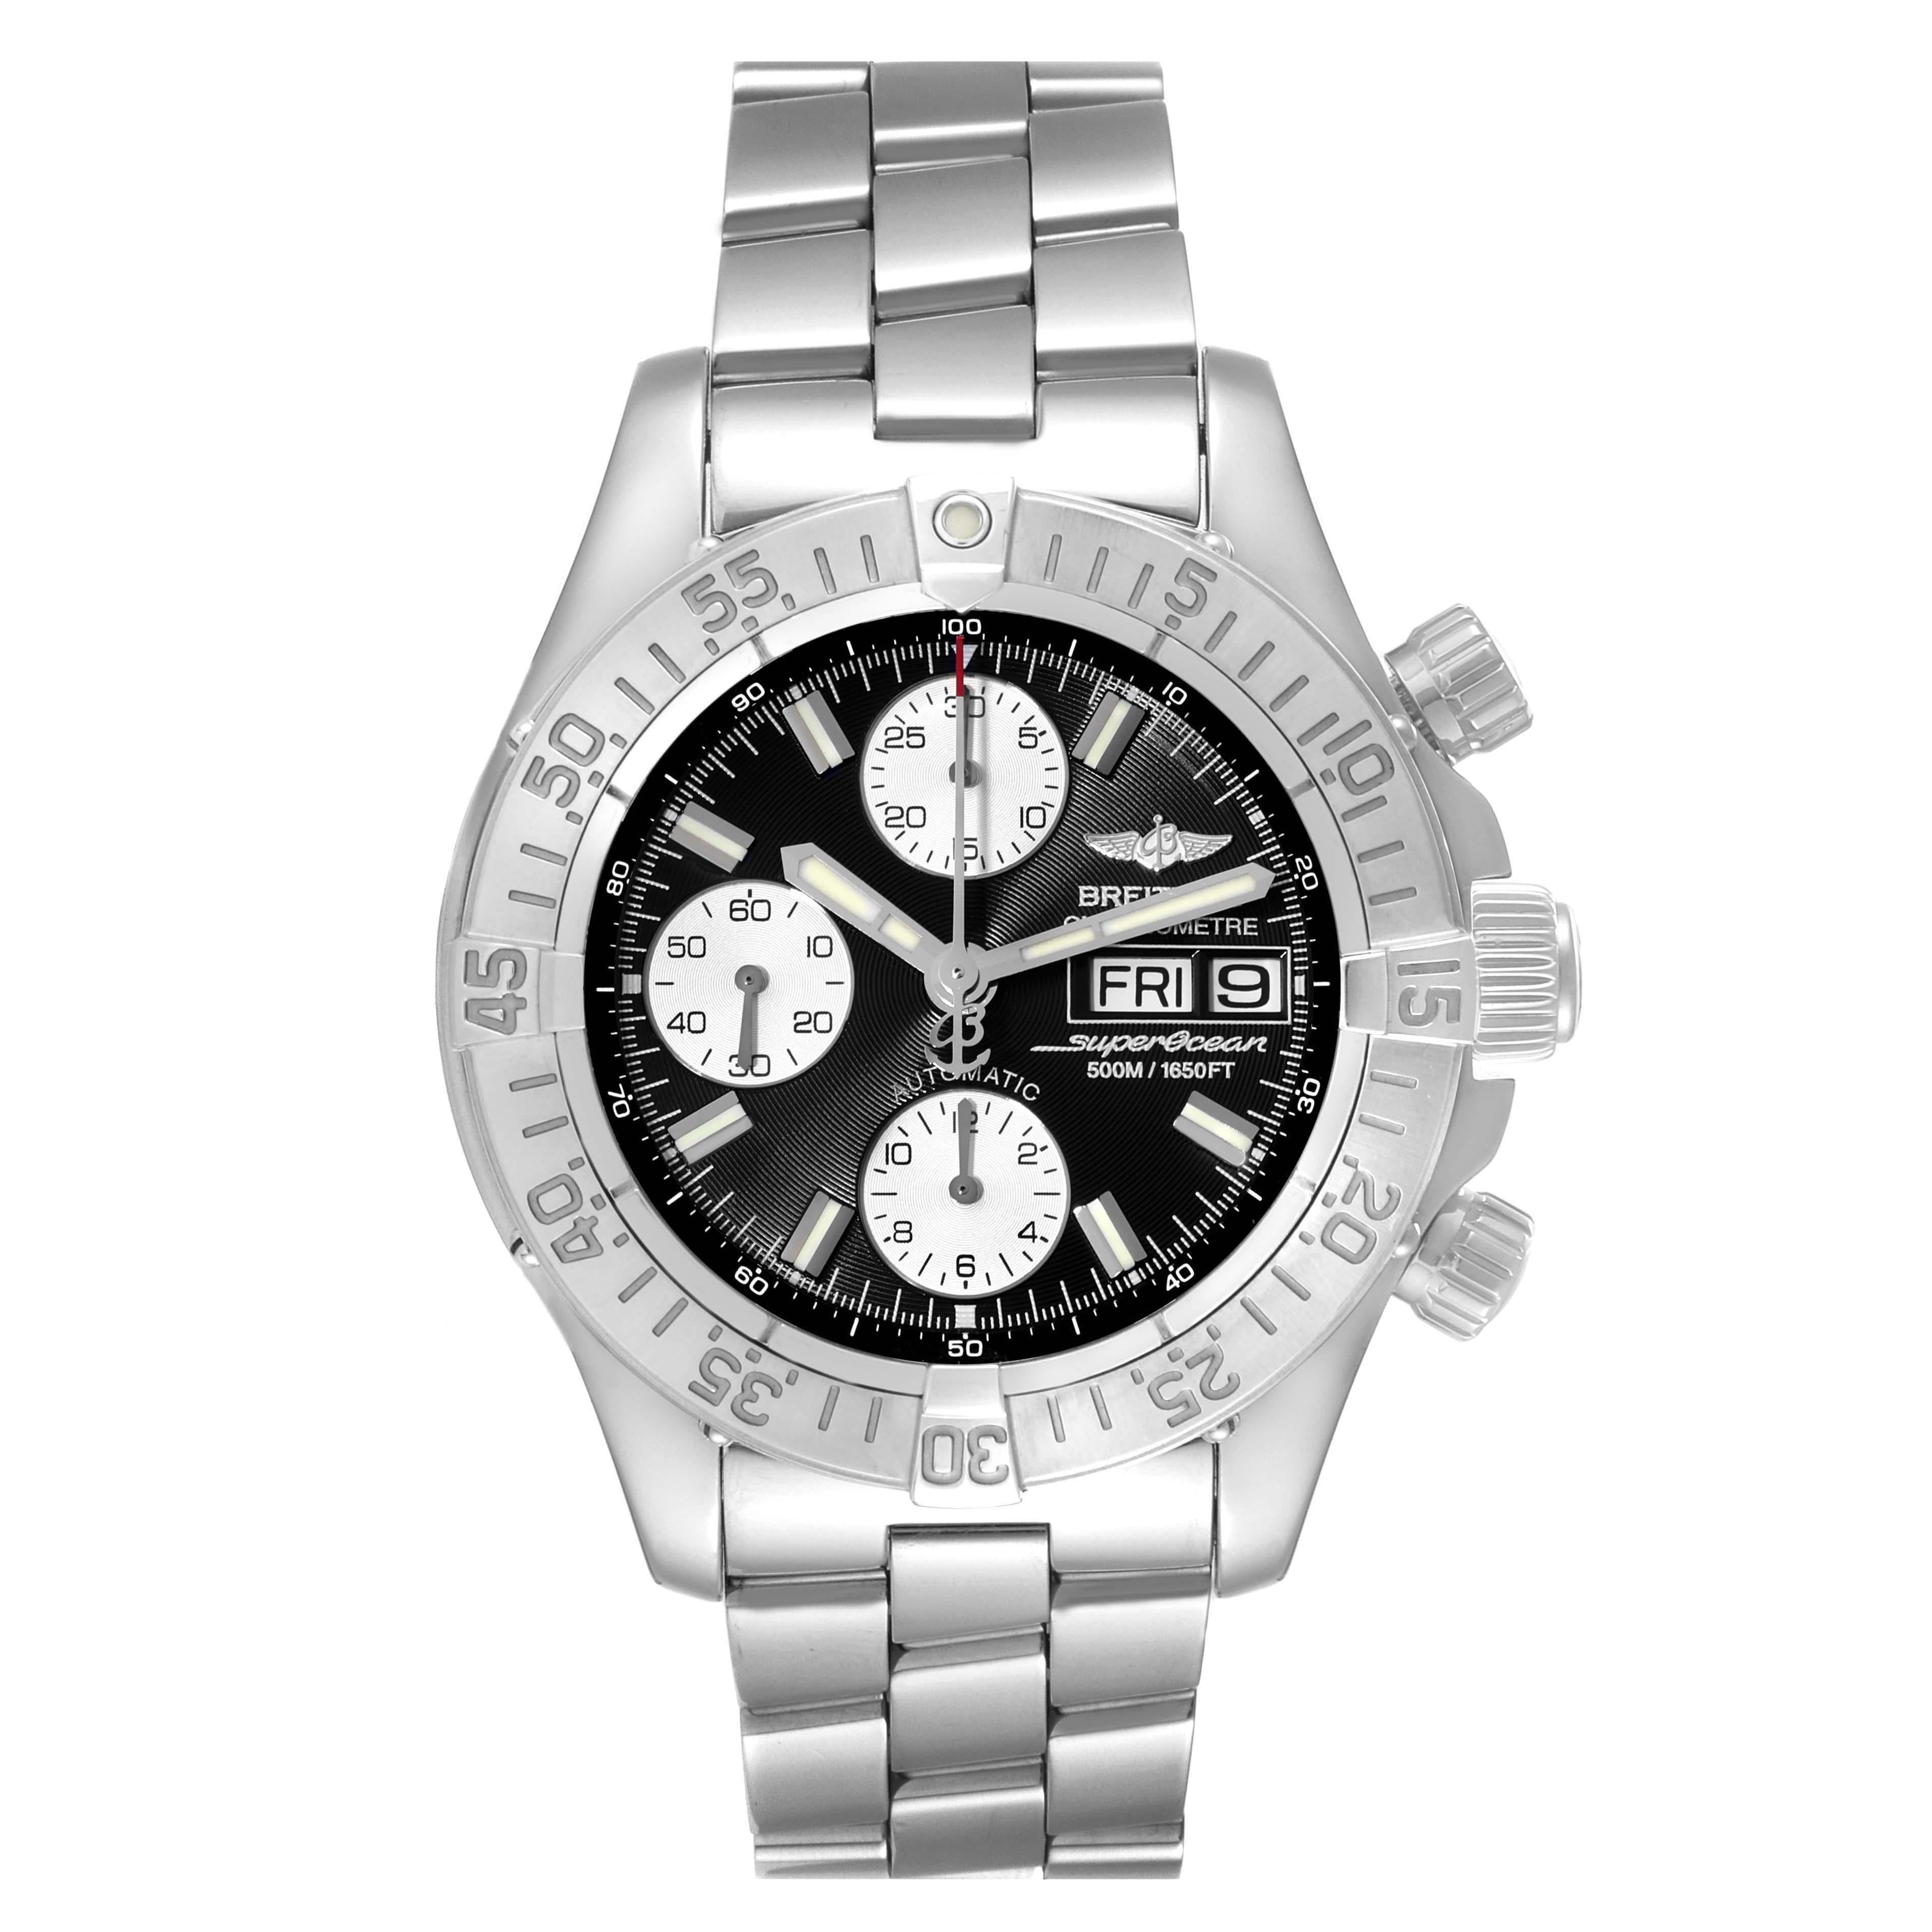 Breitling Superocean Black Dial Chronograph Steel Mens Watch A13340 Papers. Automatic self-winding chronograph  movement. Stainless steel case 42.0 mm in diameter. Stainless steel screwed-down crown and pushers. Stainless steel unidirectional